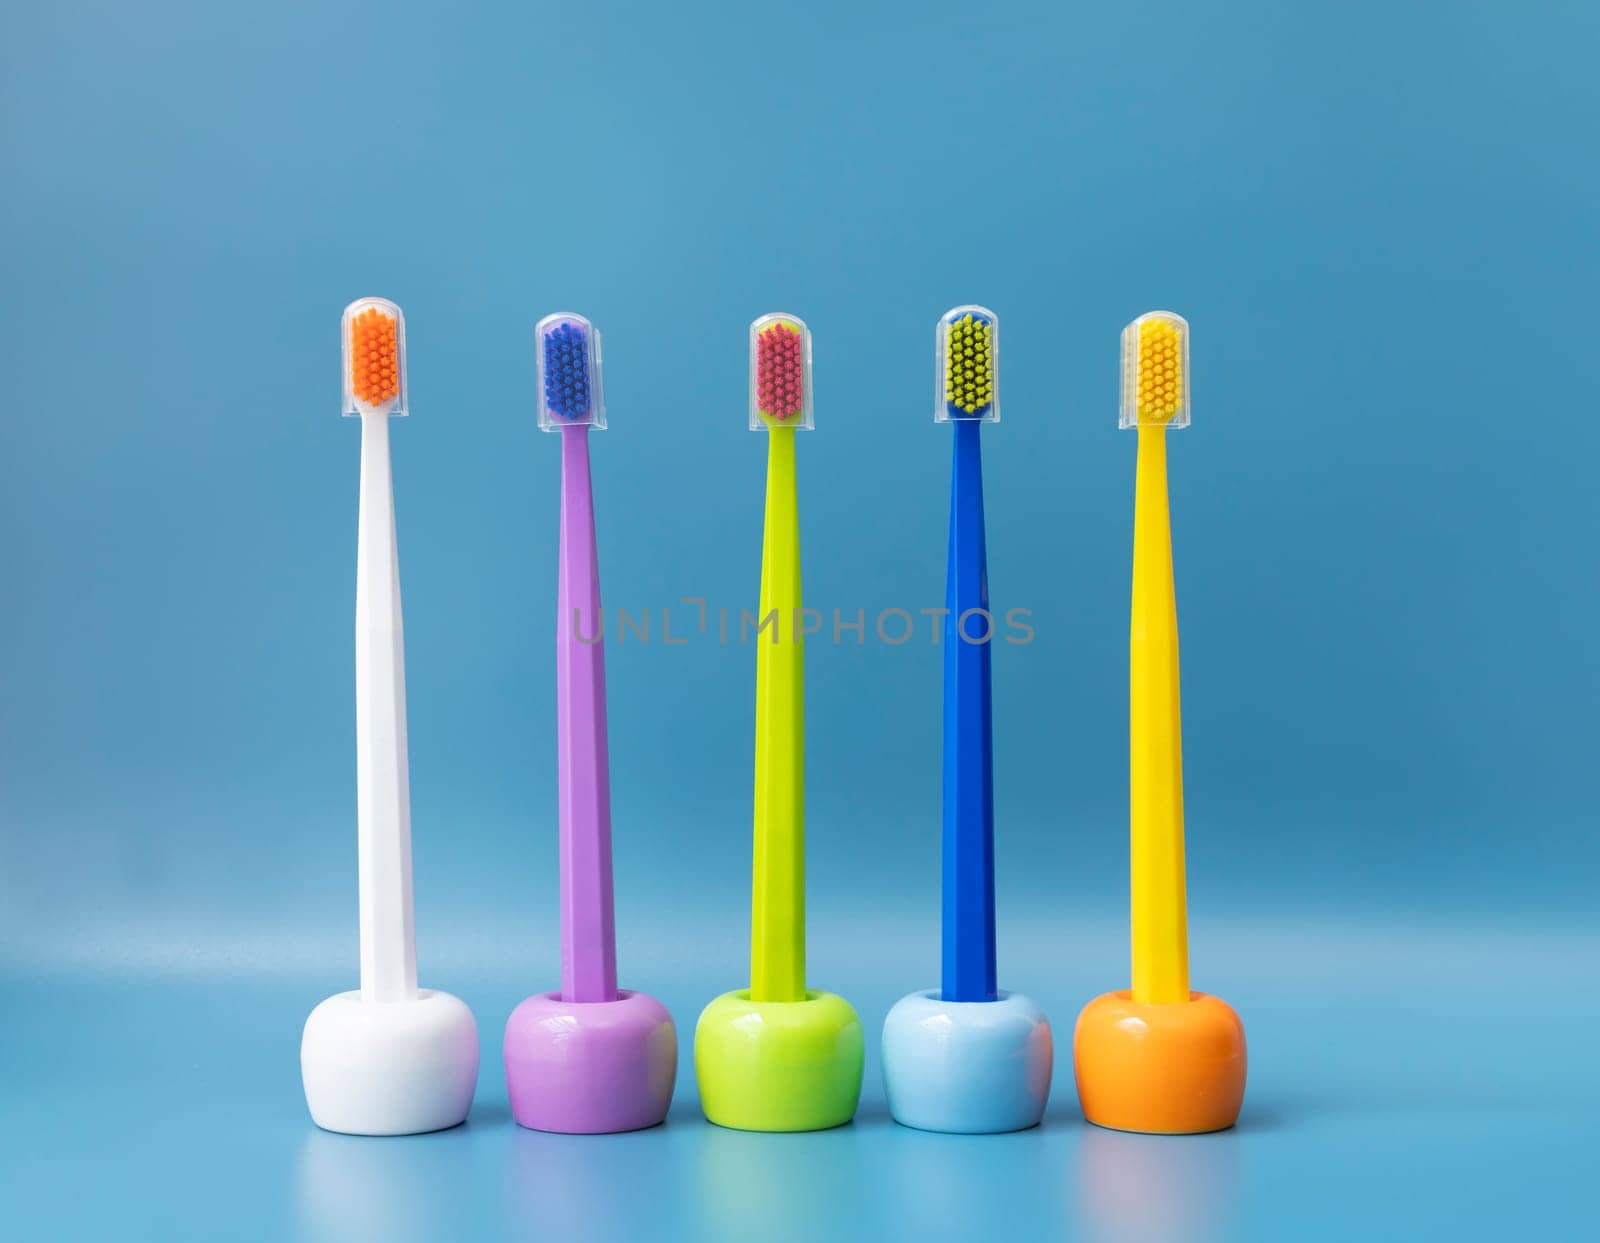 Large Number of Brightly Colored Toothbrushes On Stands, Holder in Row On Blue Background. Morning hygiene, Bathroom accessories. Dental Health Care. Horizontal Plane by netatsi